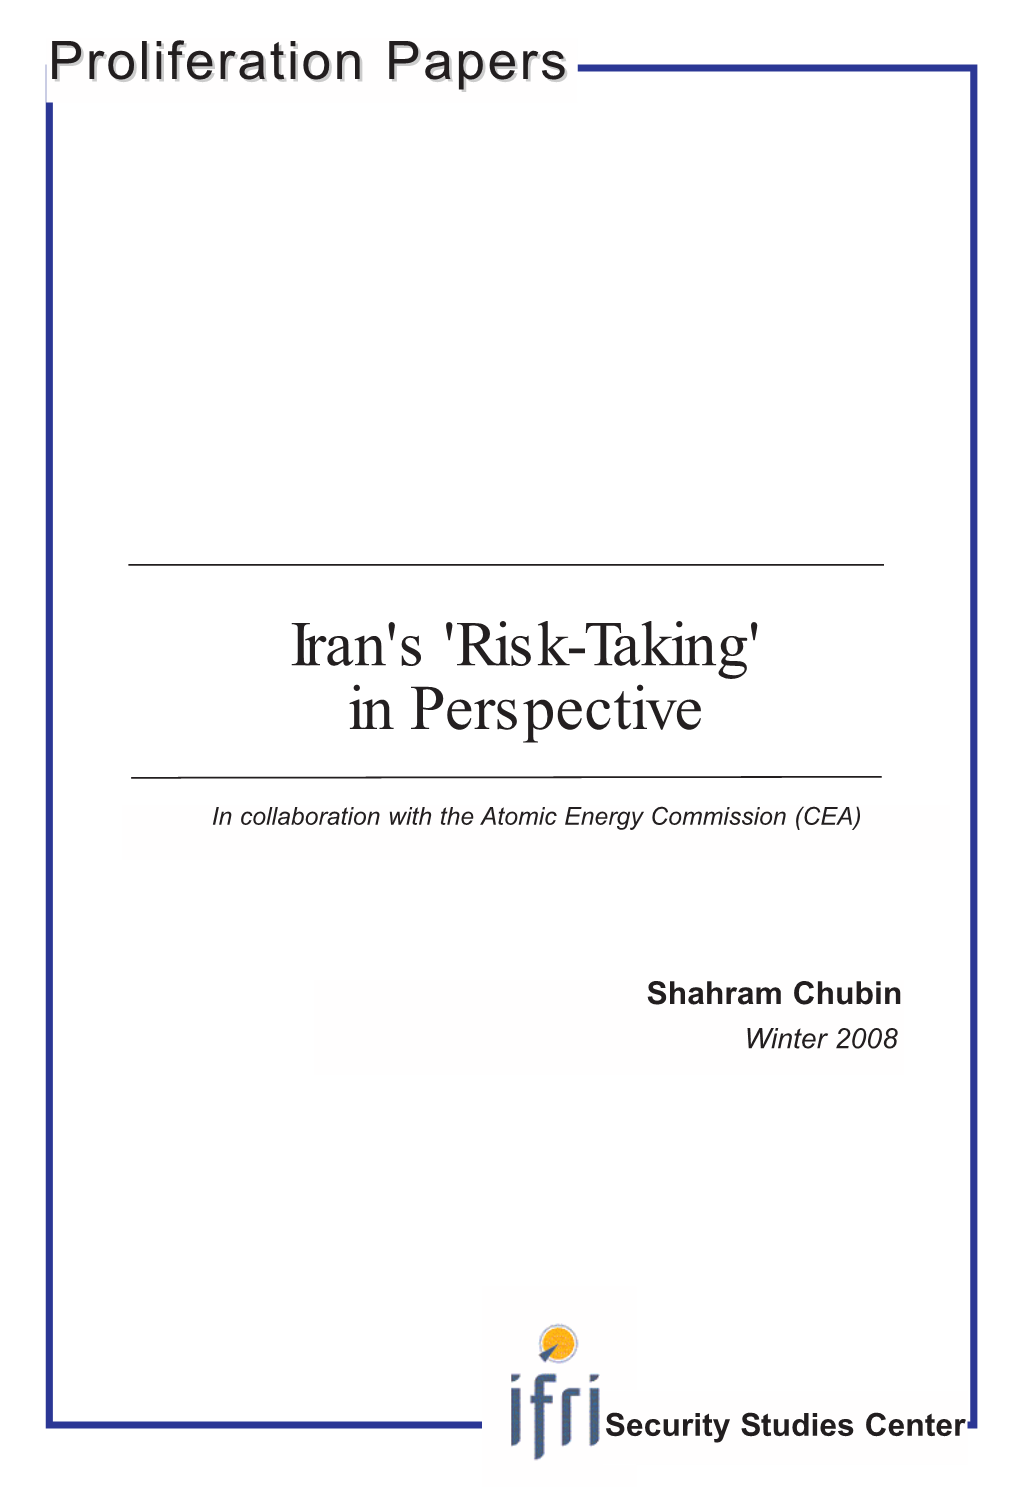 Iran's 'Risk-Taking' in Perspective